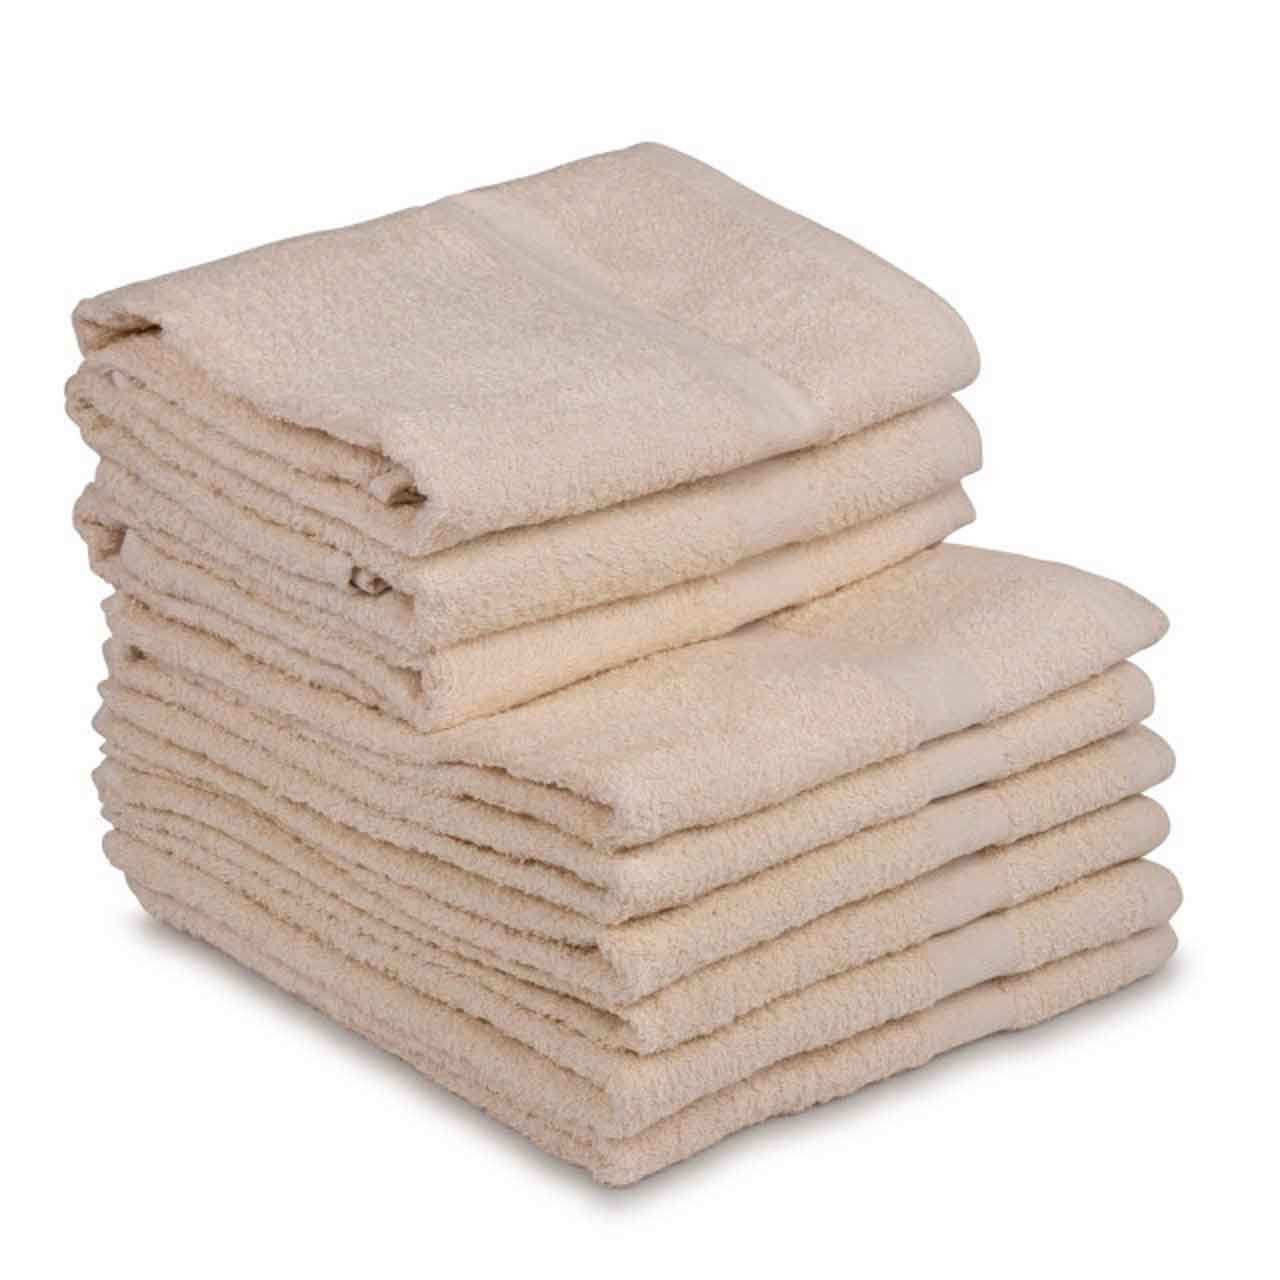 What indicators determine the quality of the Ecru Towel Collection, 16s ecru towels?